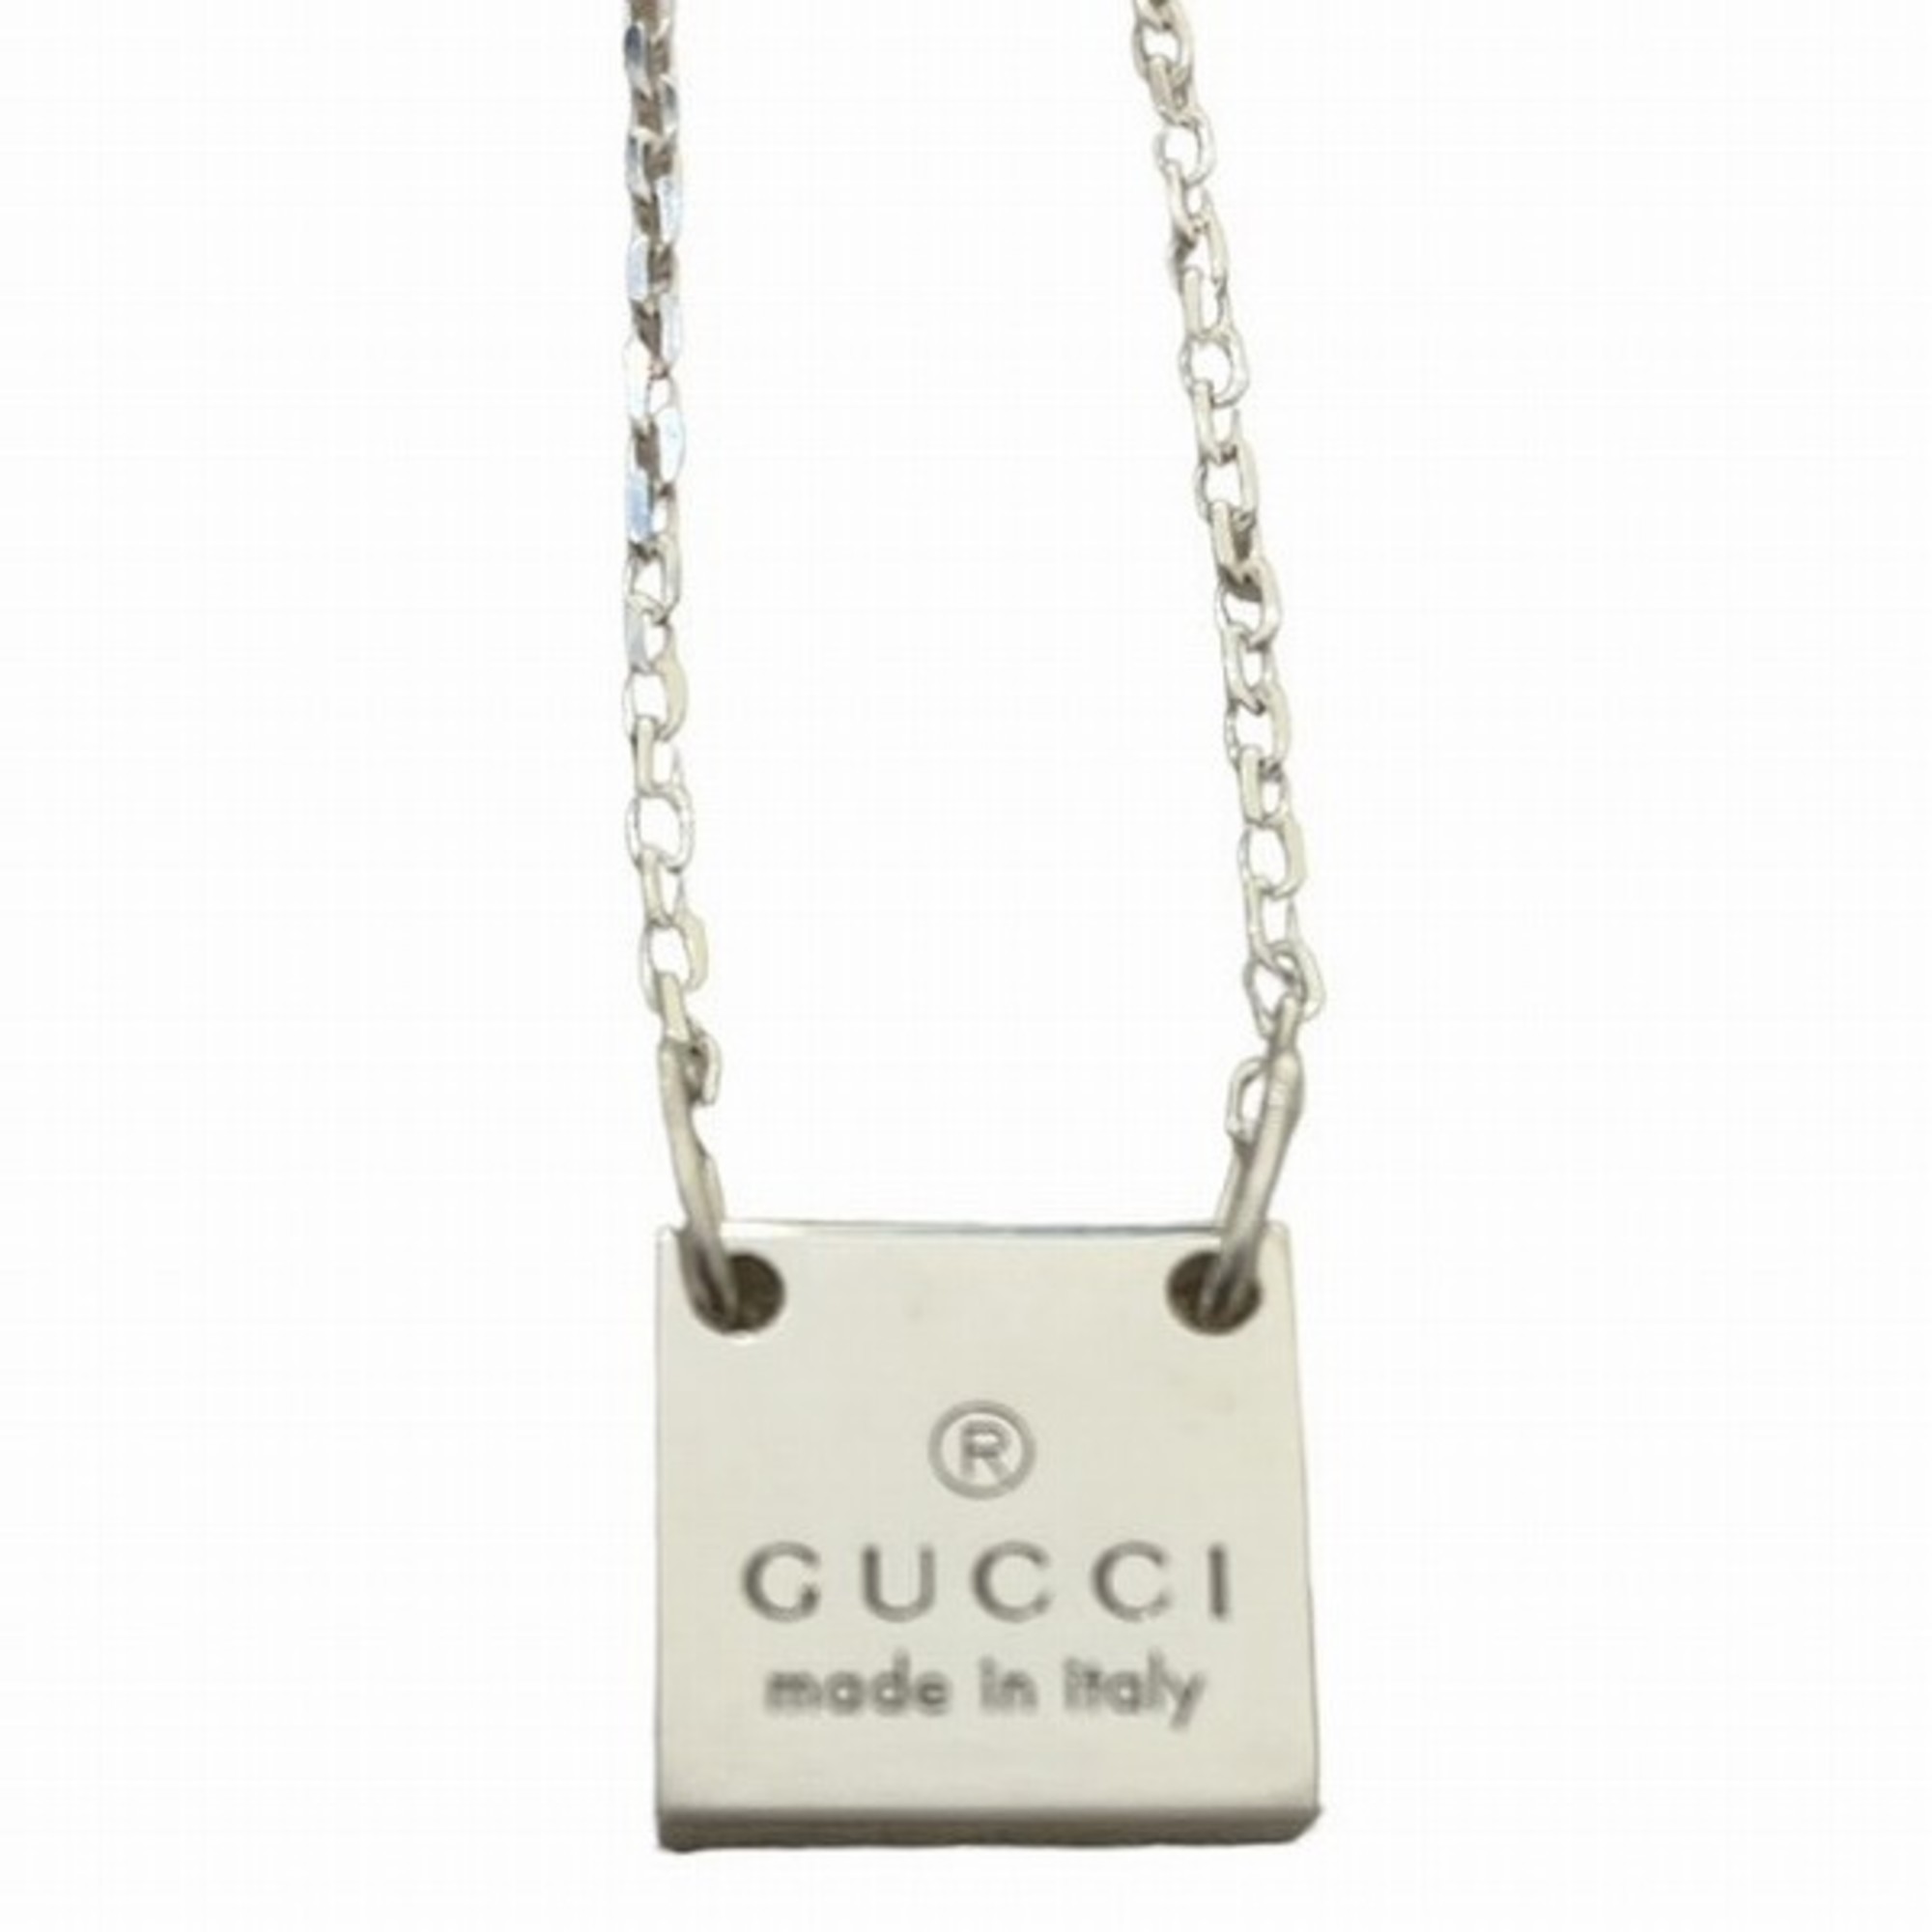 GUCCI Logo Plate Brand Accessories Necklace Unisex Wallet